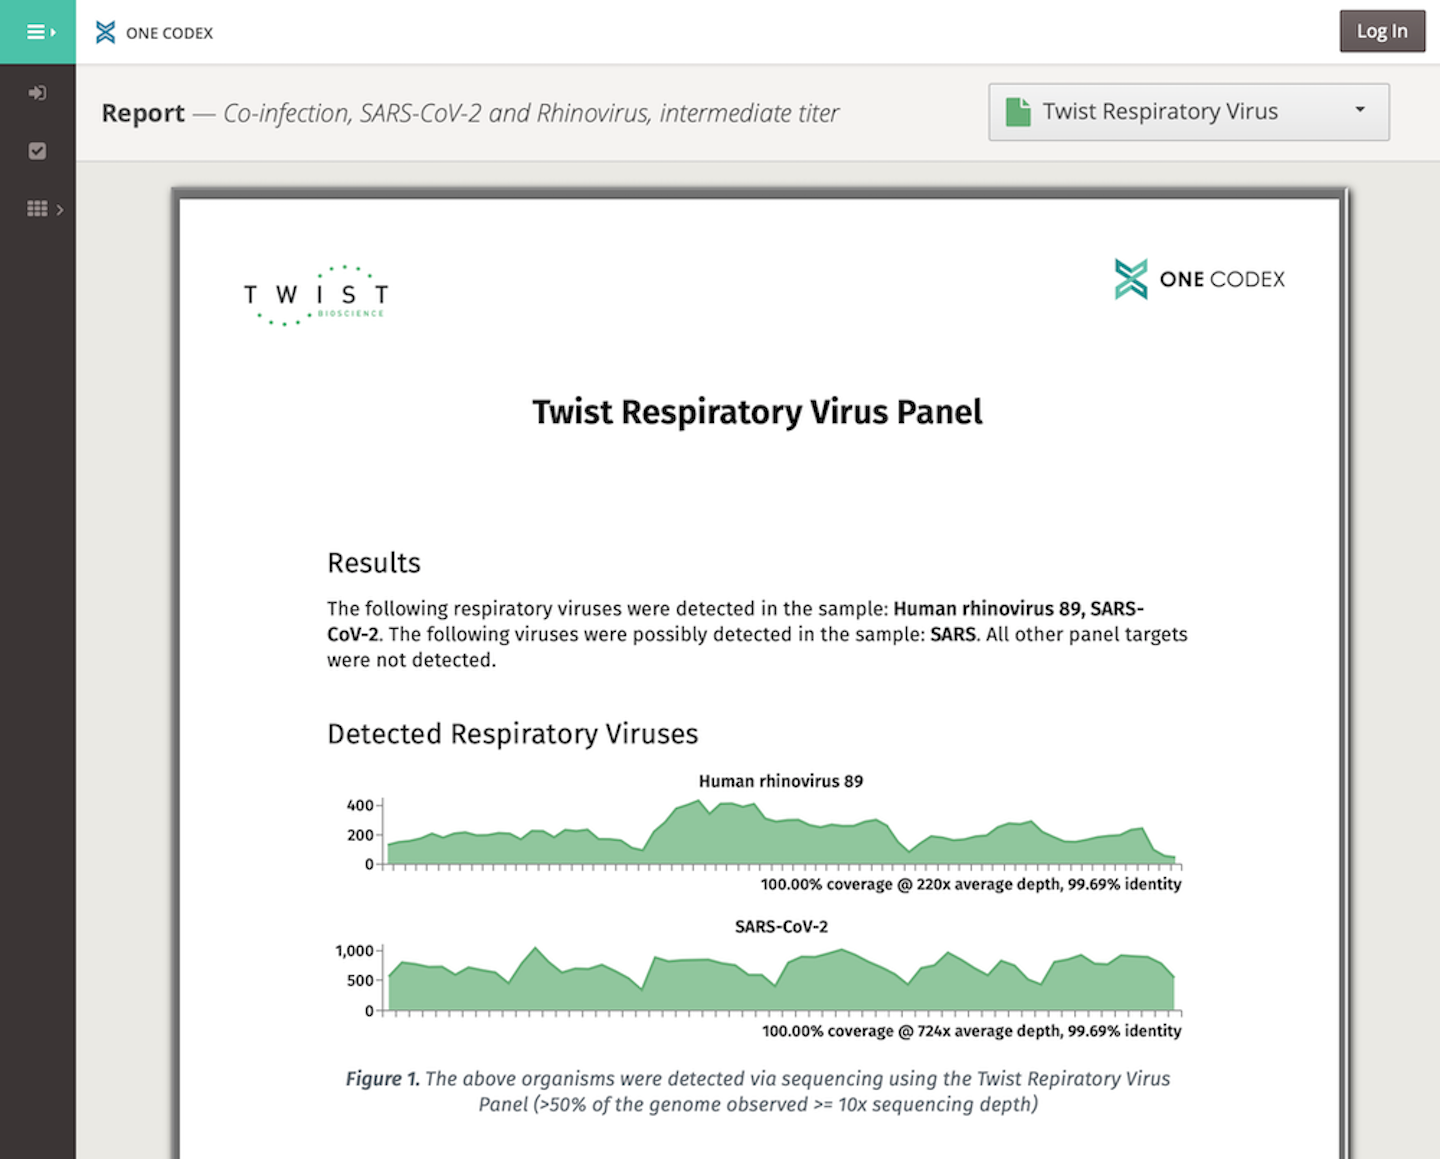 One Codex offers a rapid, easy-to-interpret analysis for the Twist Respiratory Virus Research Panel